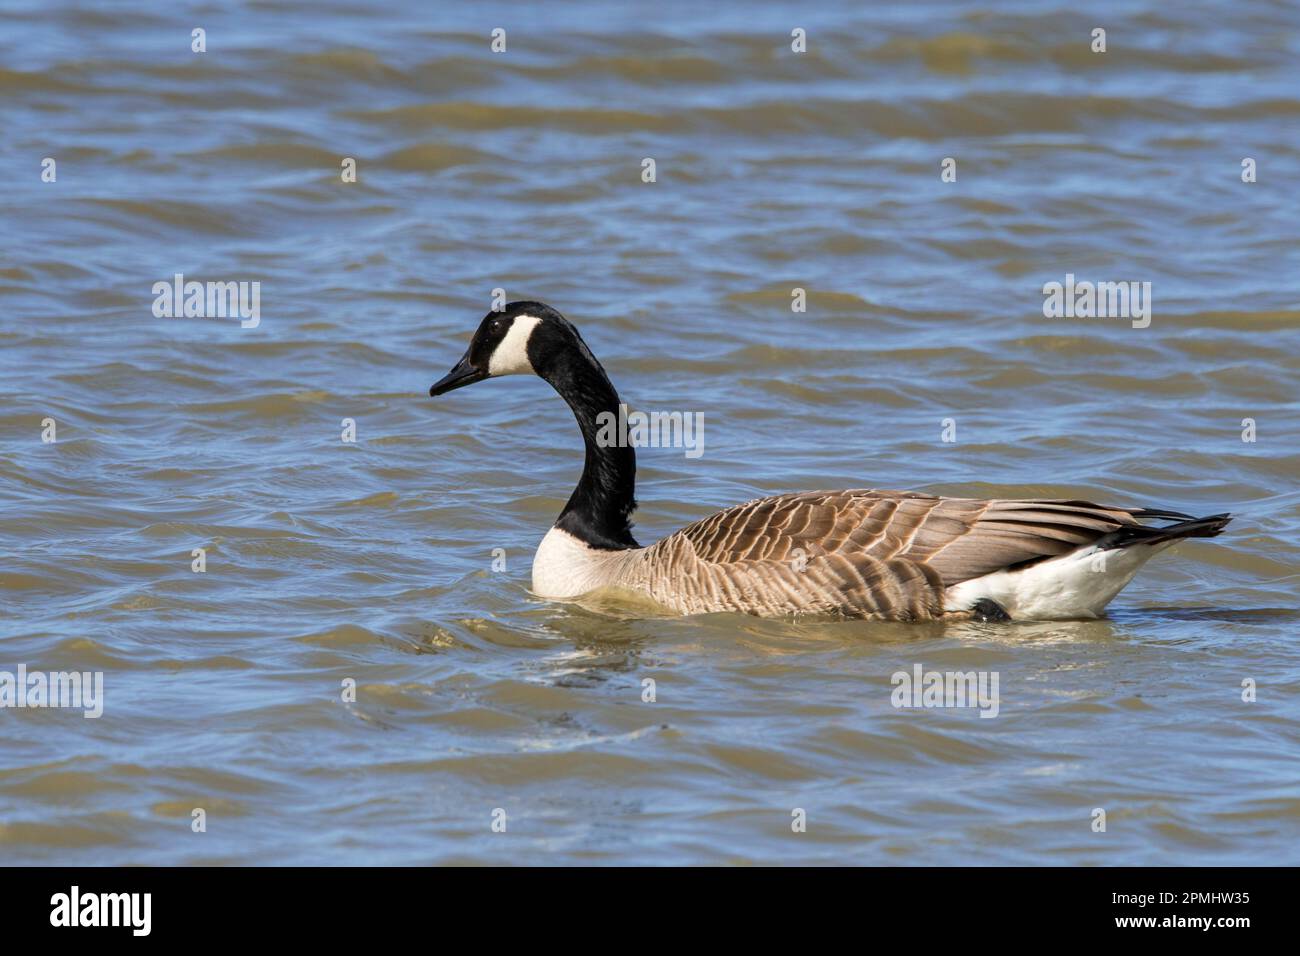 Canada goose / Canadian goose (Branta canadensis) swimming in water of pond in spring Stock Photo